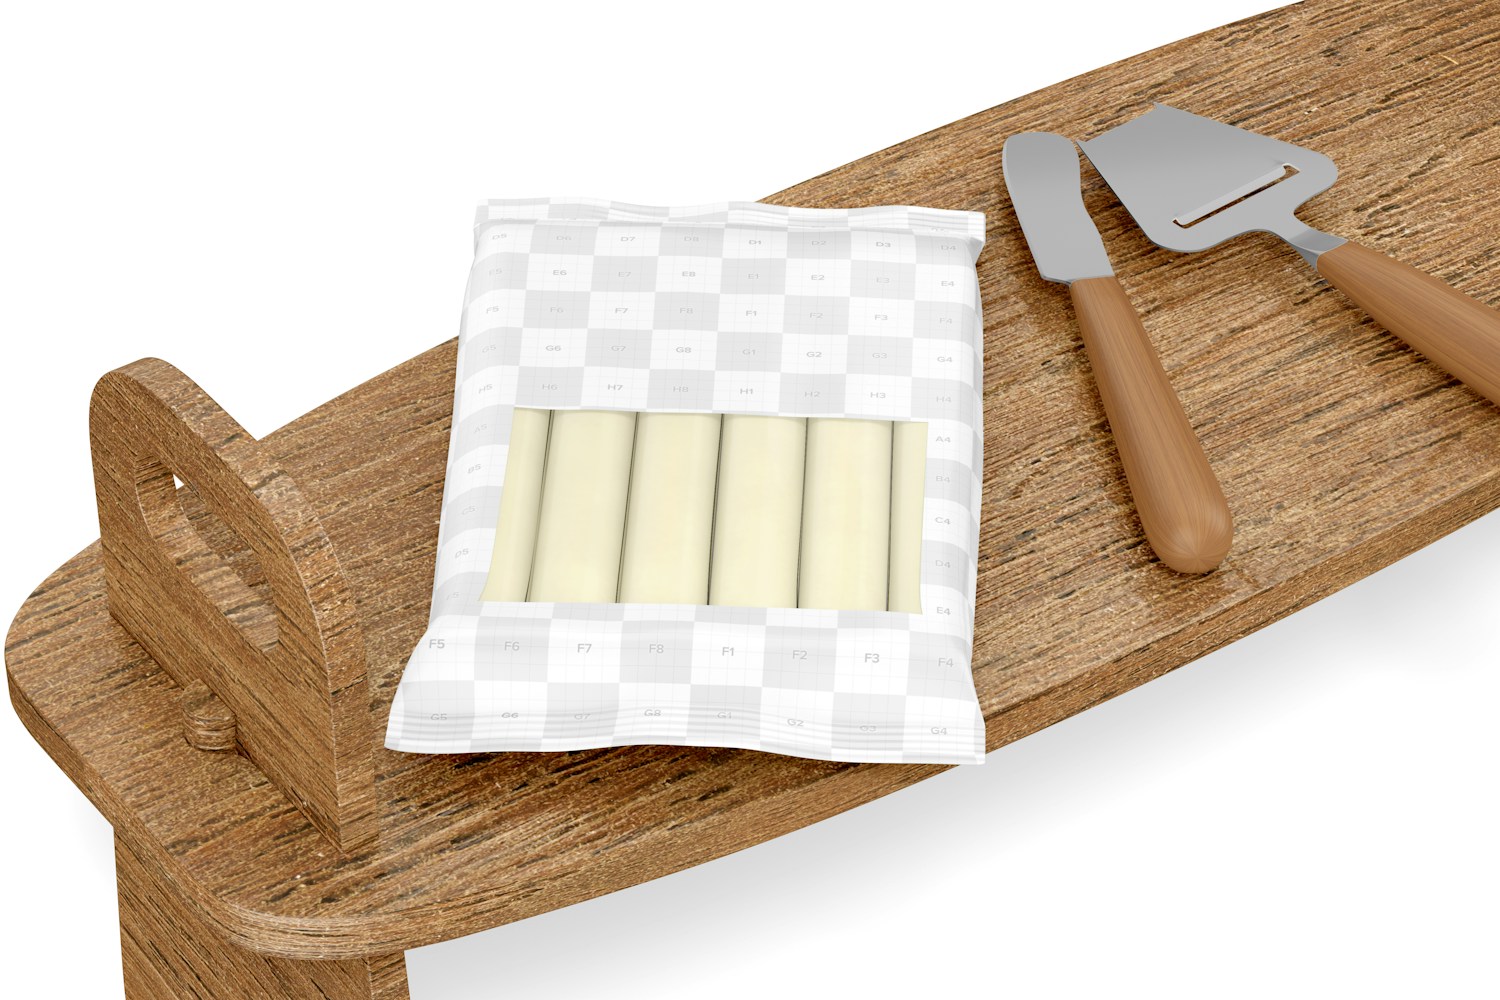 String Cheese Packaging Mockup, on Plate